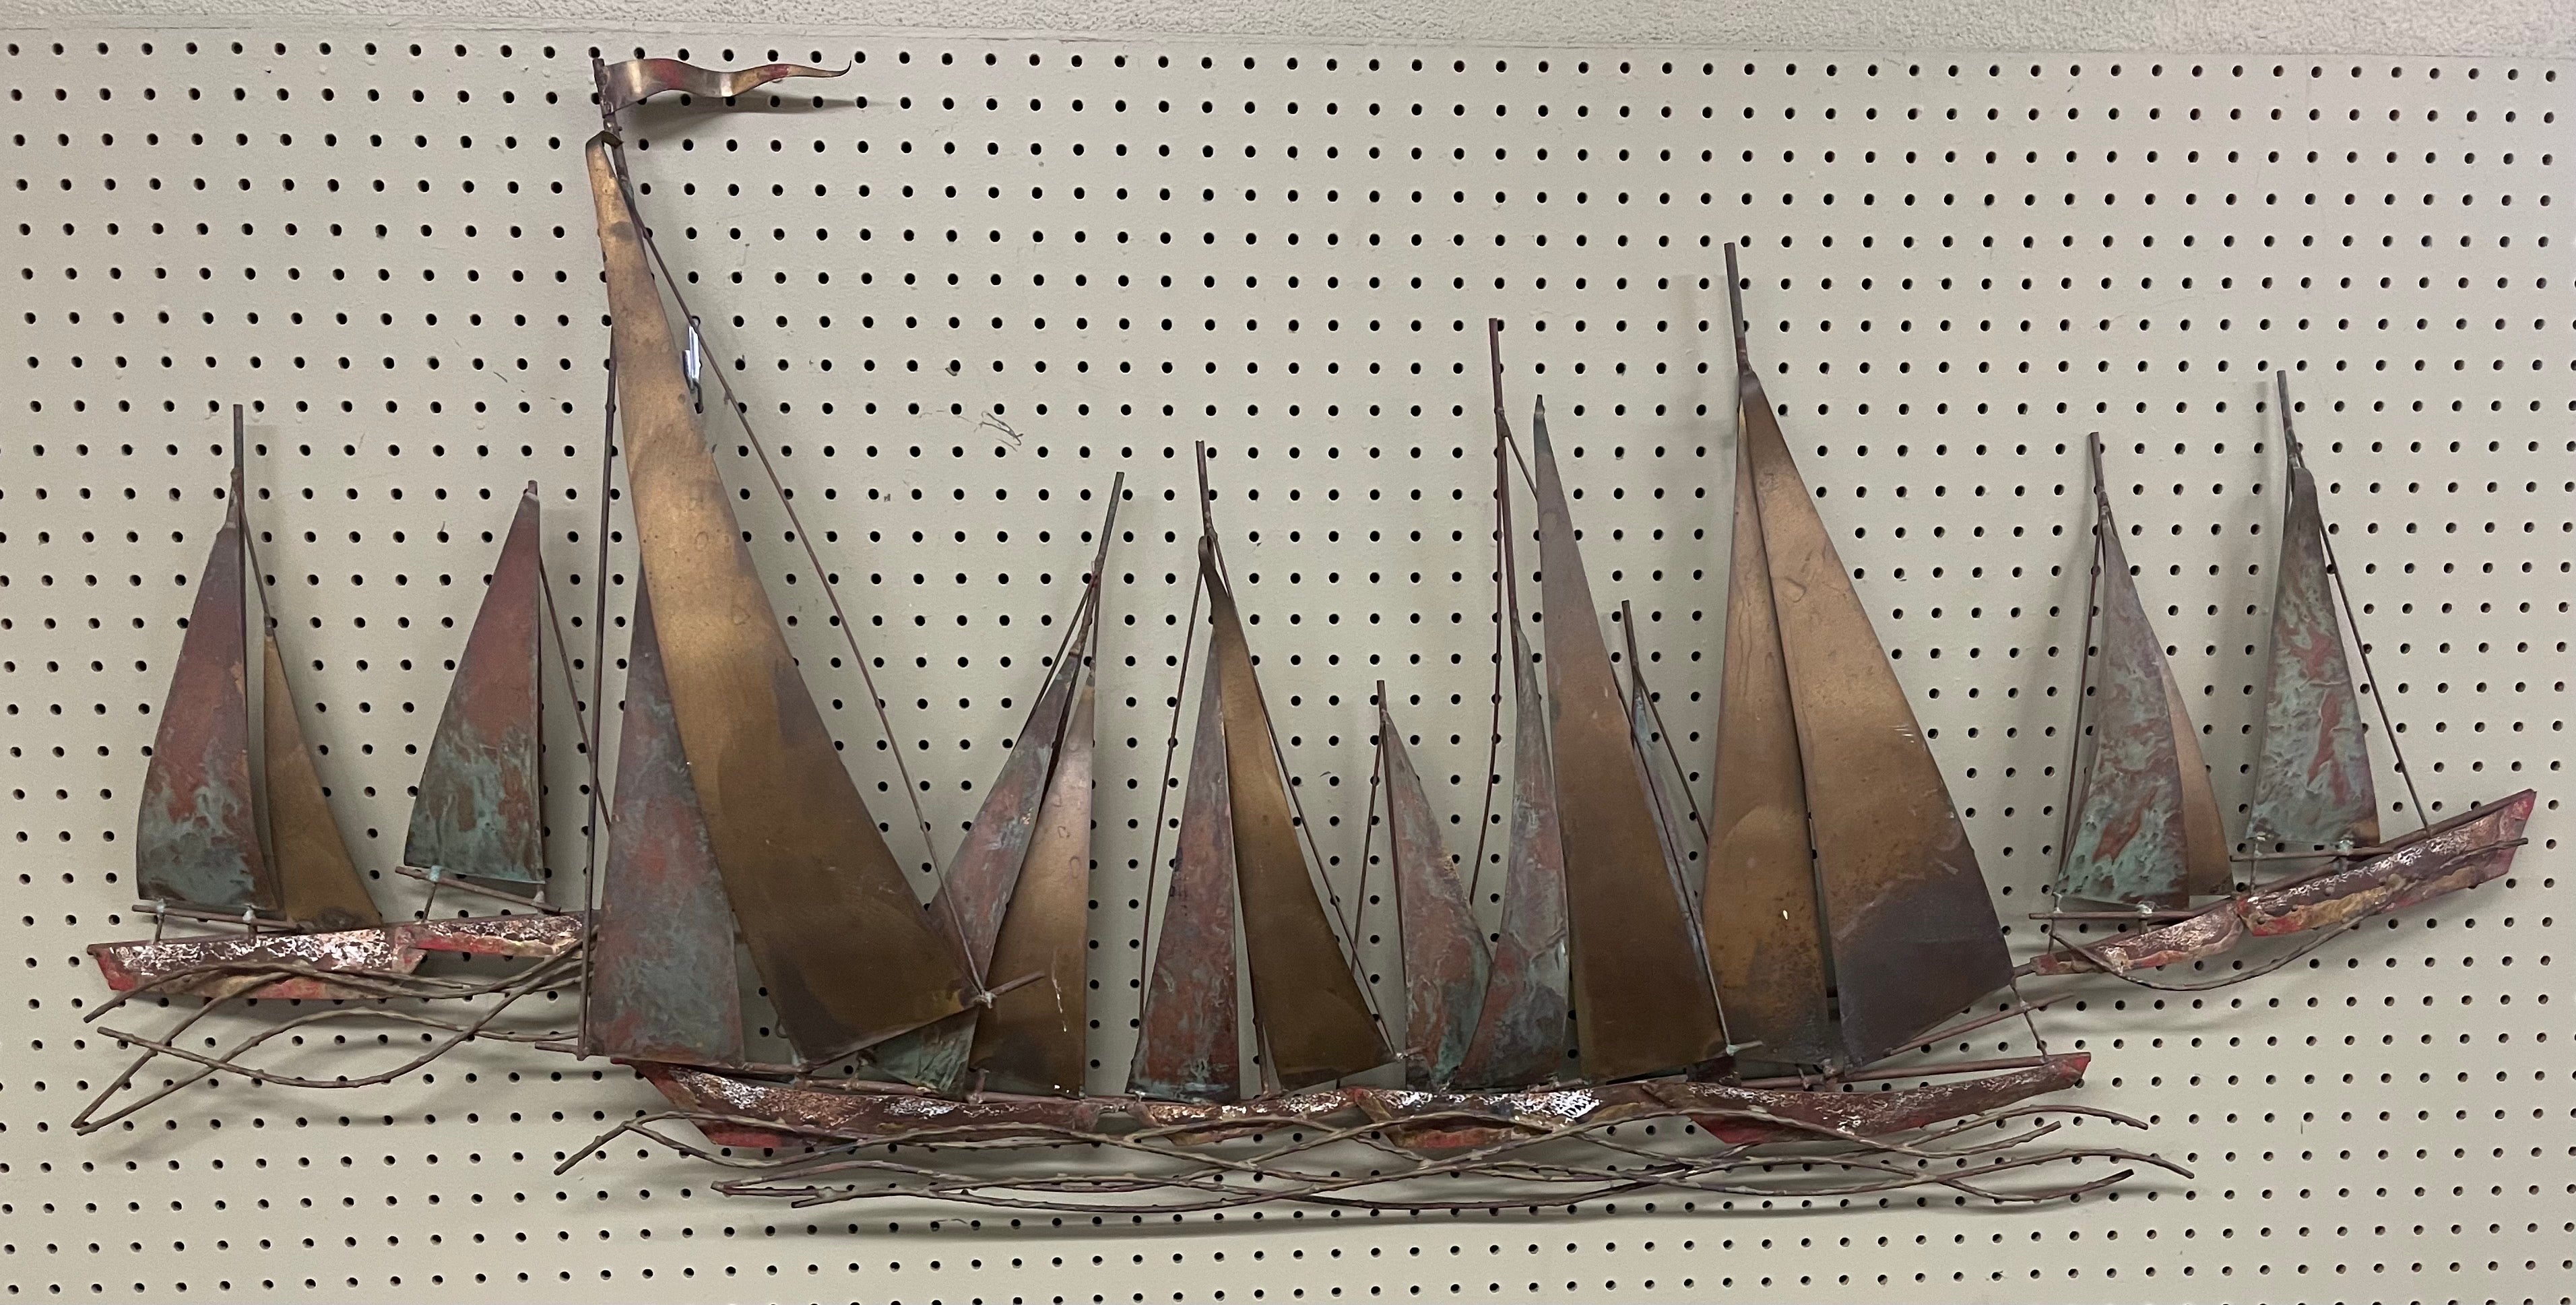 Super rare and very hard to find sail boat regatta mixed metal wall sculpture by C. Jere for Artisan House, circa 1970s. The piece, depicting a sailboat regatta out at sea, is in very good condition and has great color, depth and craftsmanship. The